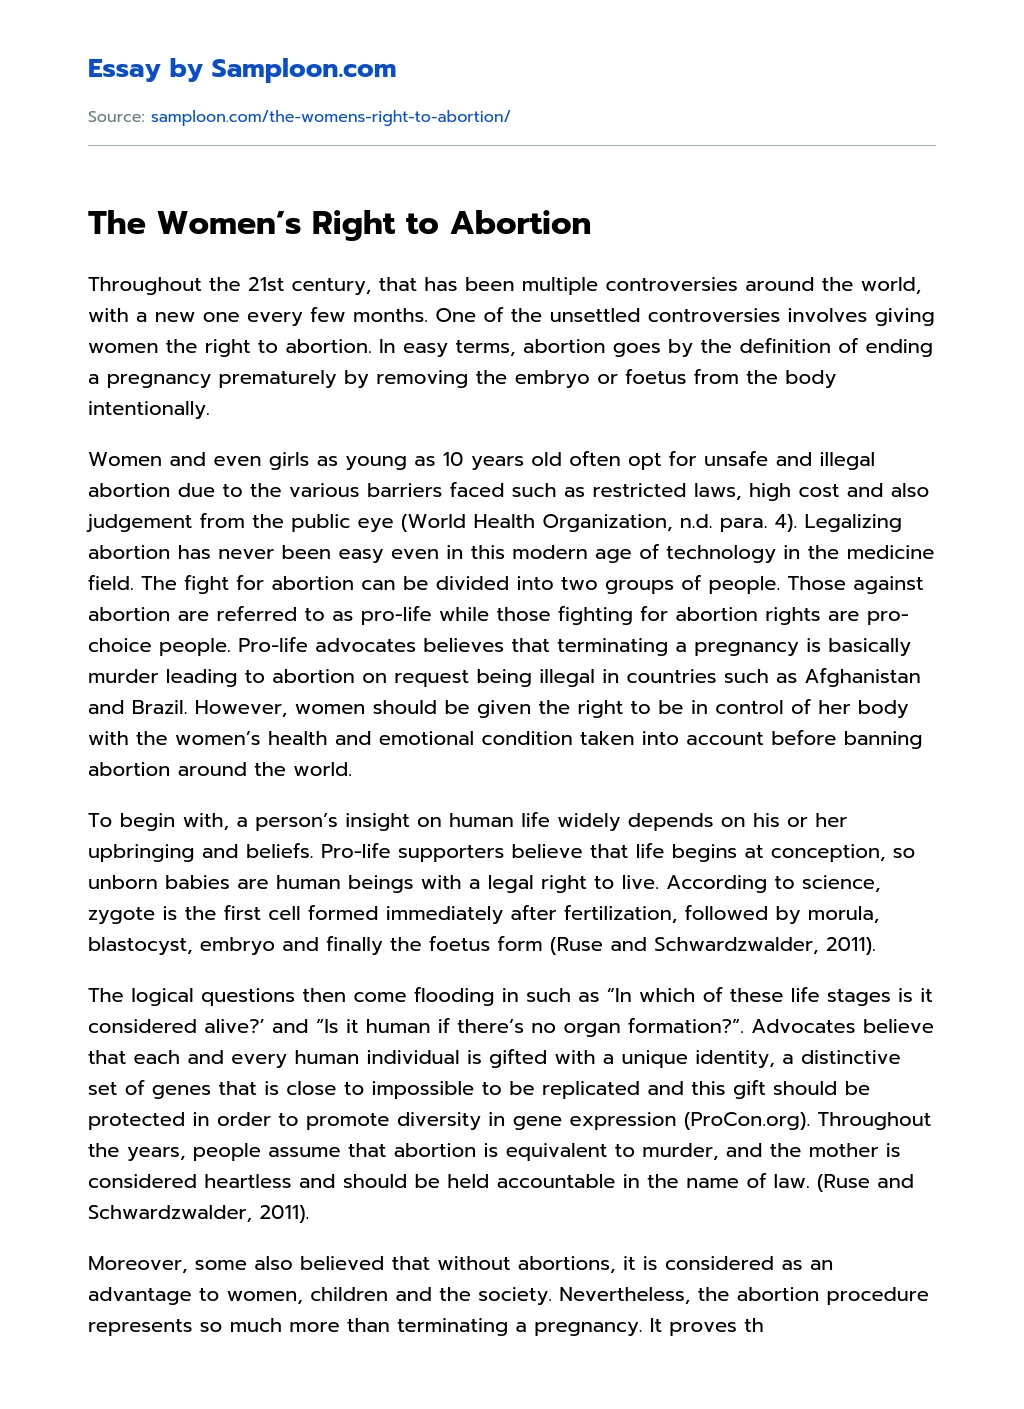 The Women’s Right to Abortion essay